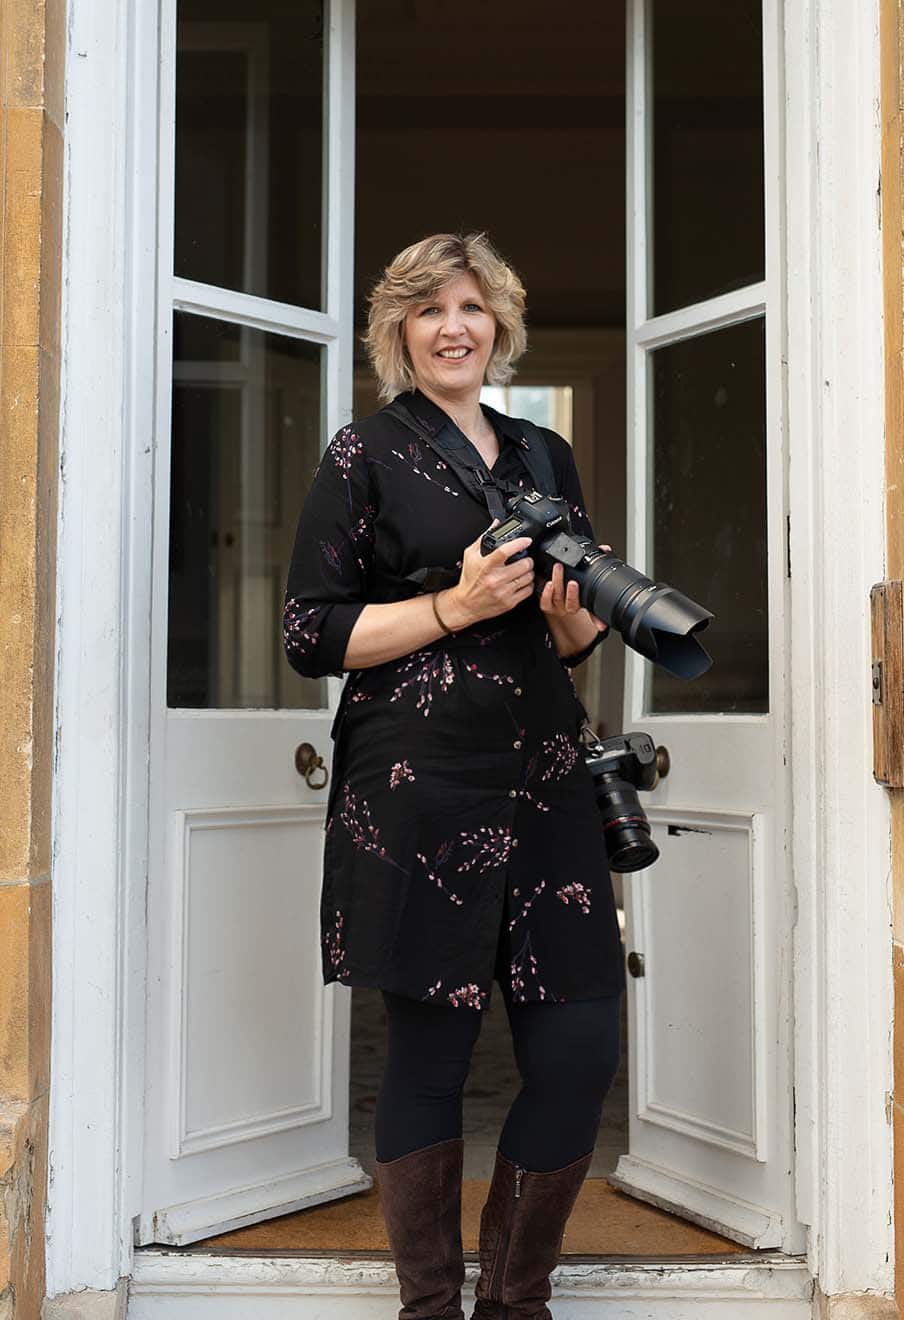 A photograph of Victoria Welton with her camera. She is an award-winning Somerset Wedding Photographer.